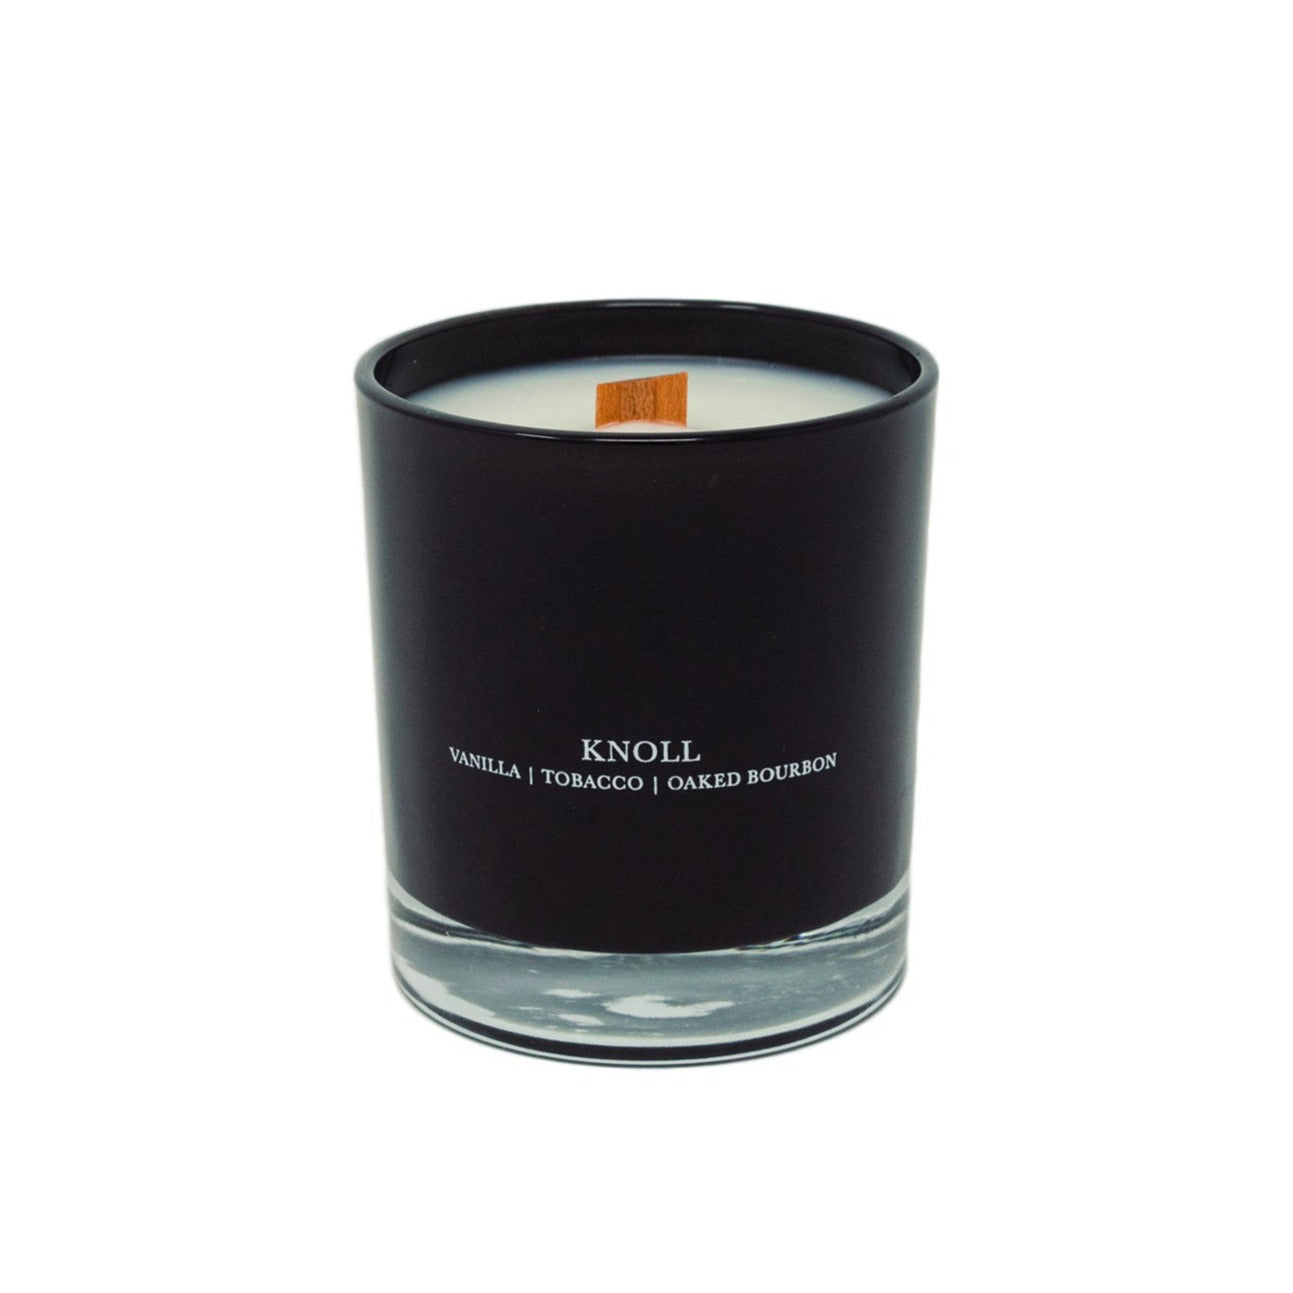 MAAPS Aromatic Wax Candle